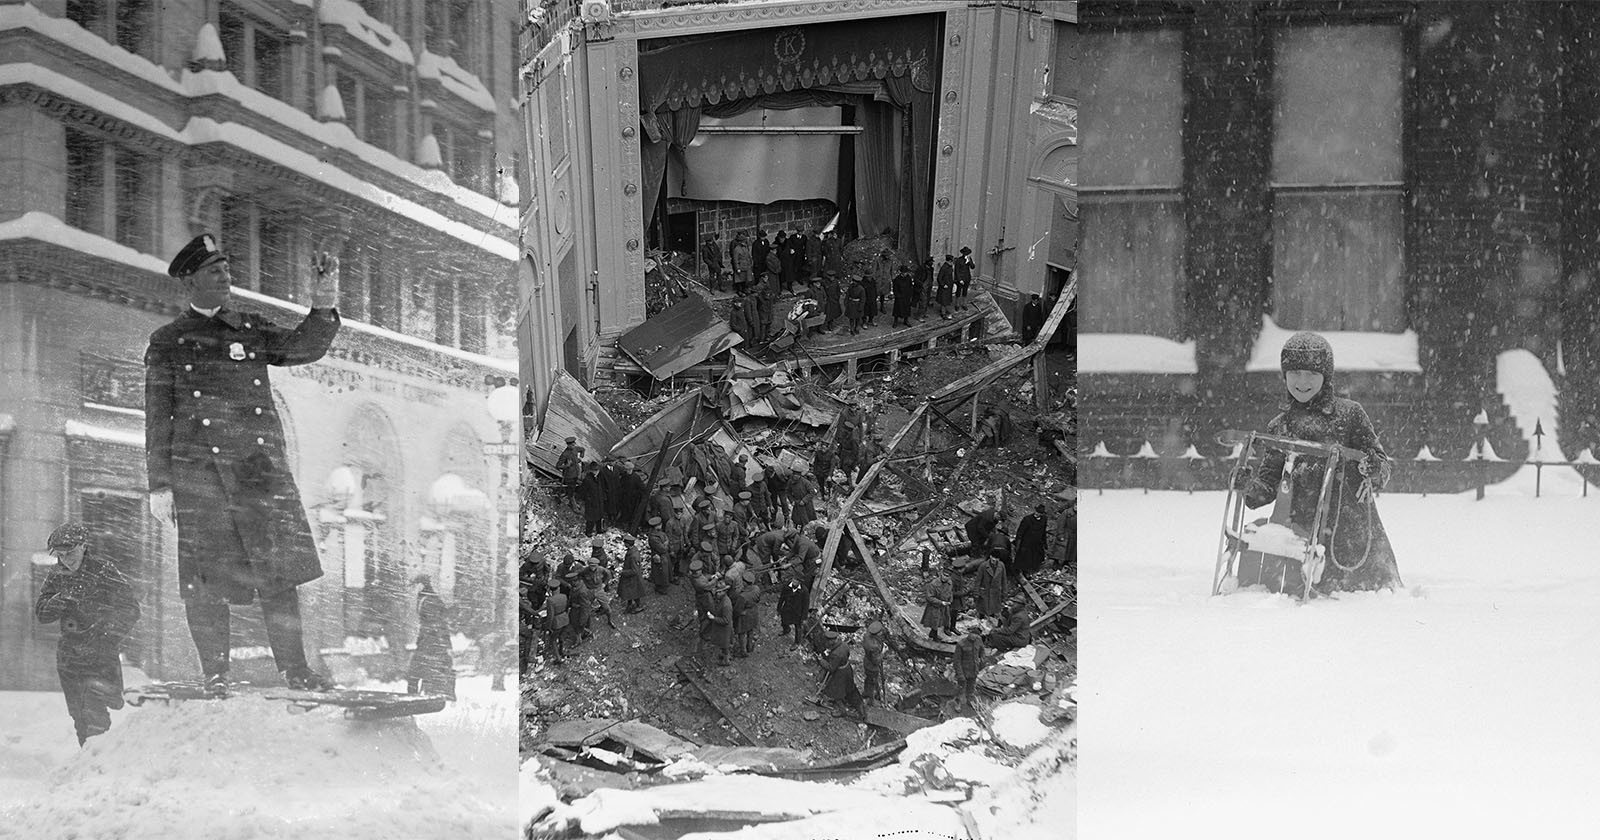  deadly snowstorm historic photos blizzard from 100 